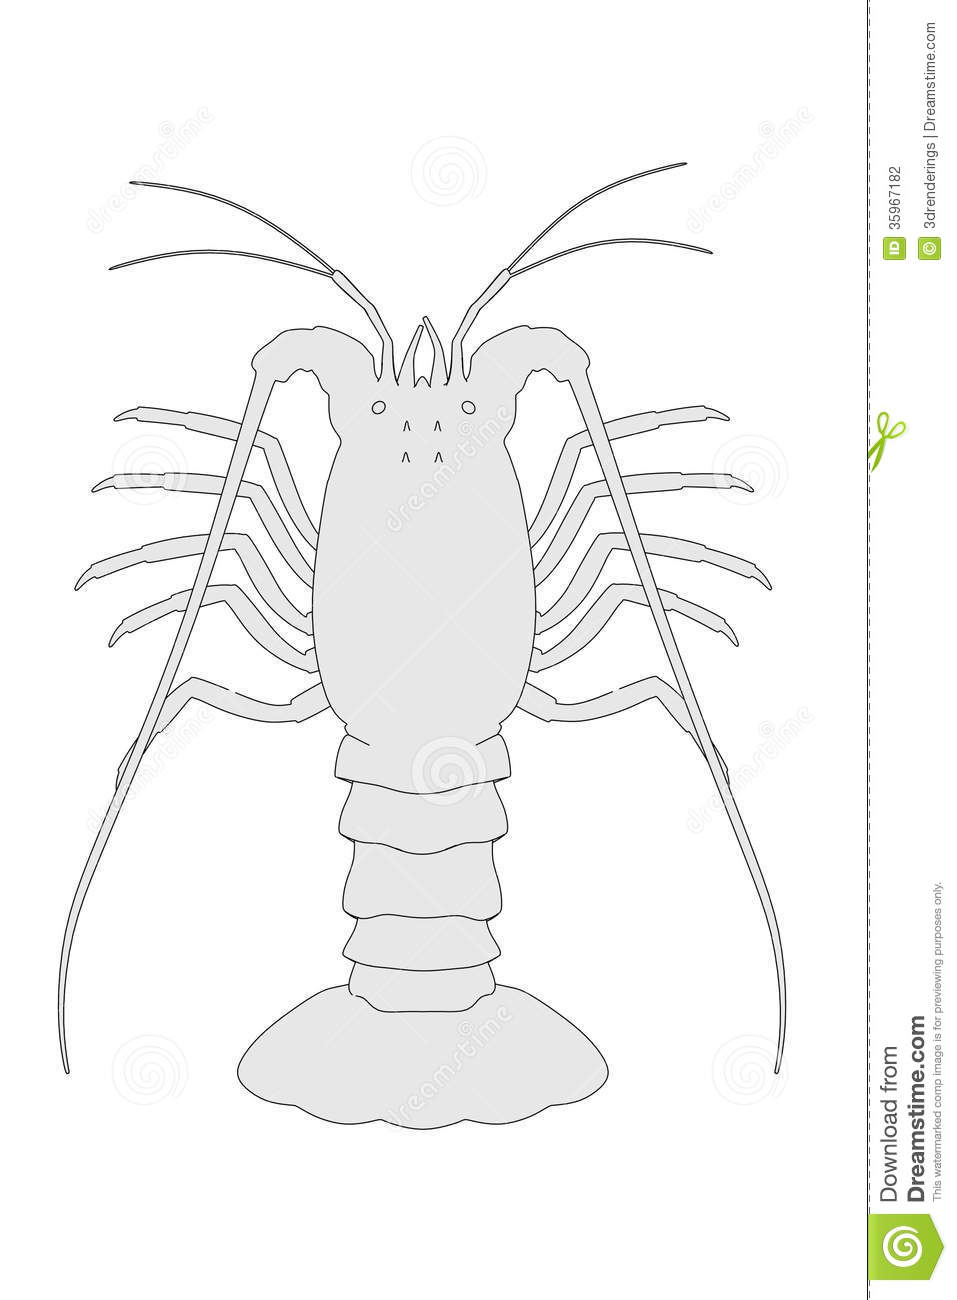 Spiny Lobster clipart #3, Download drawings